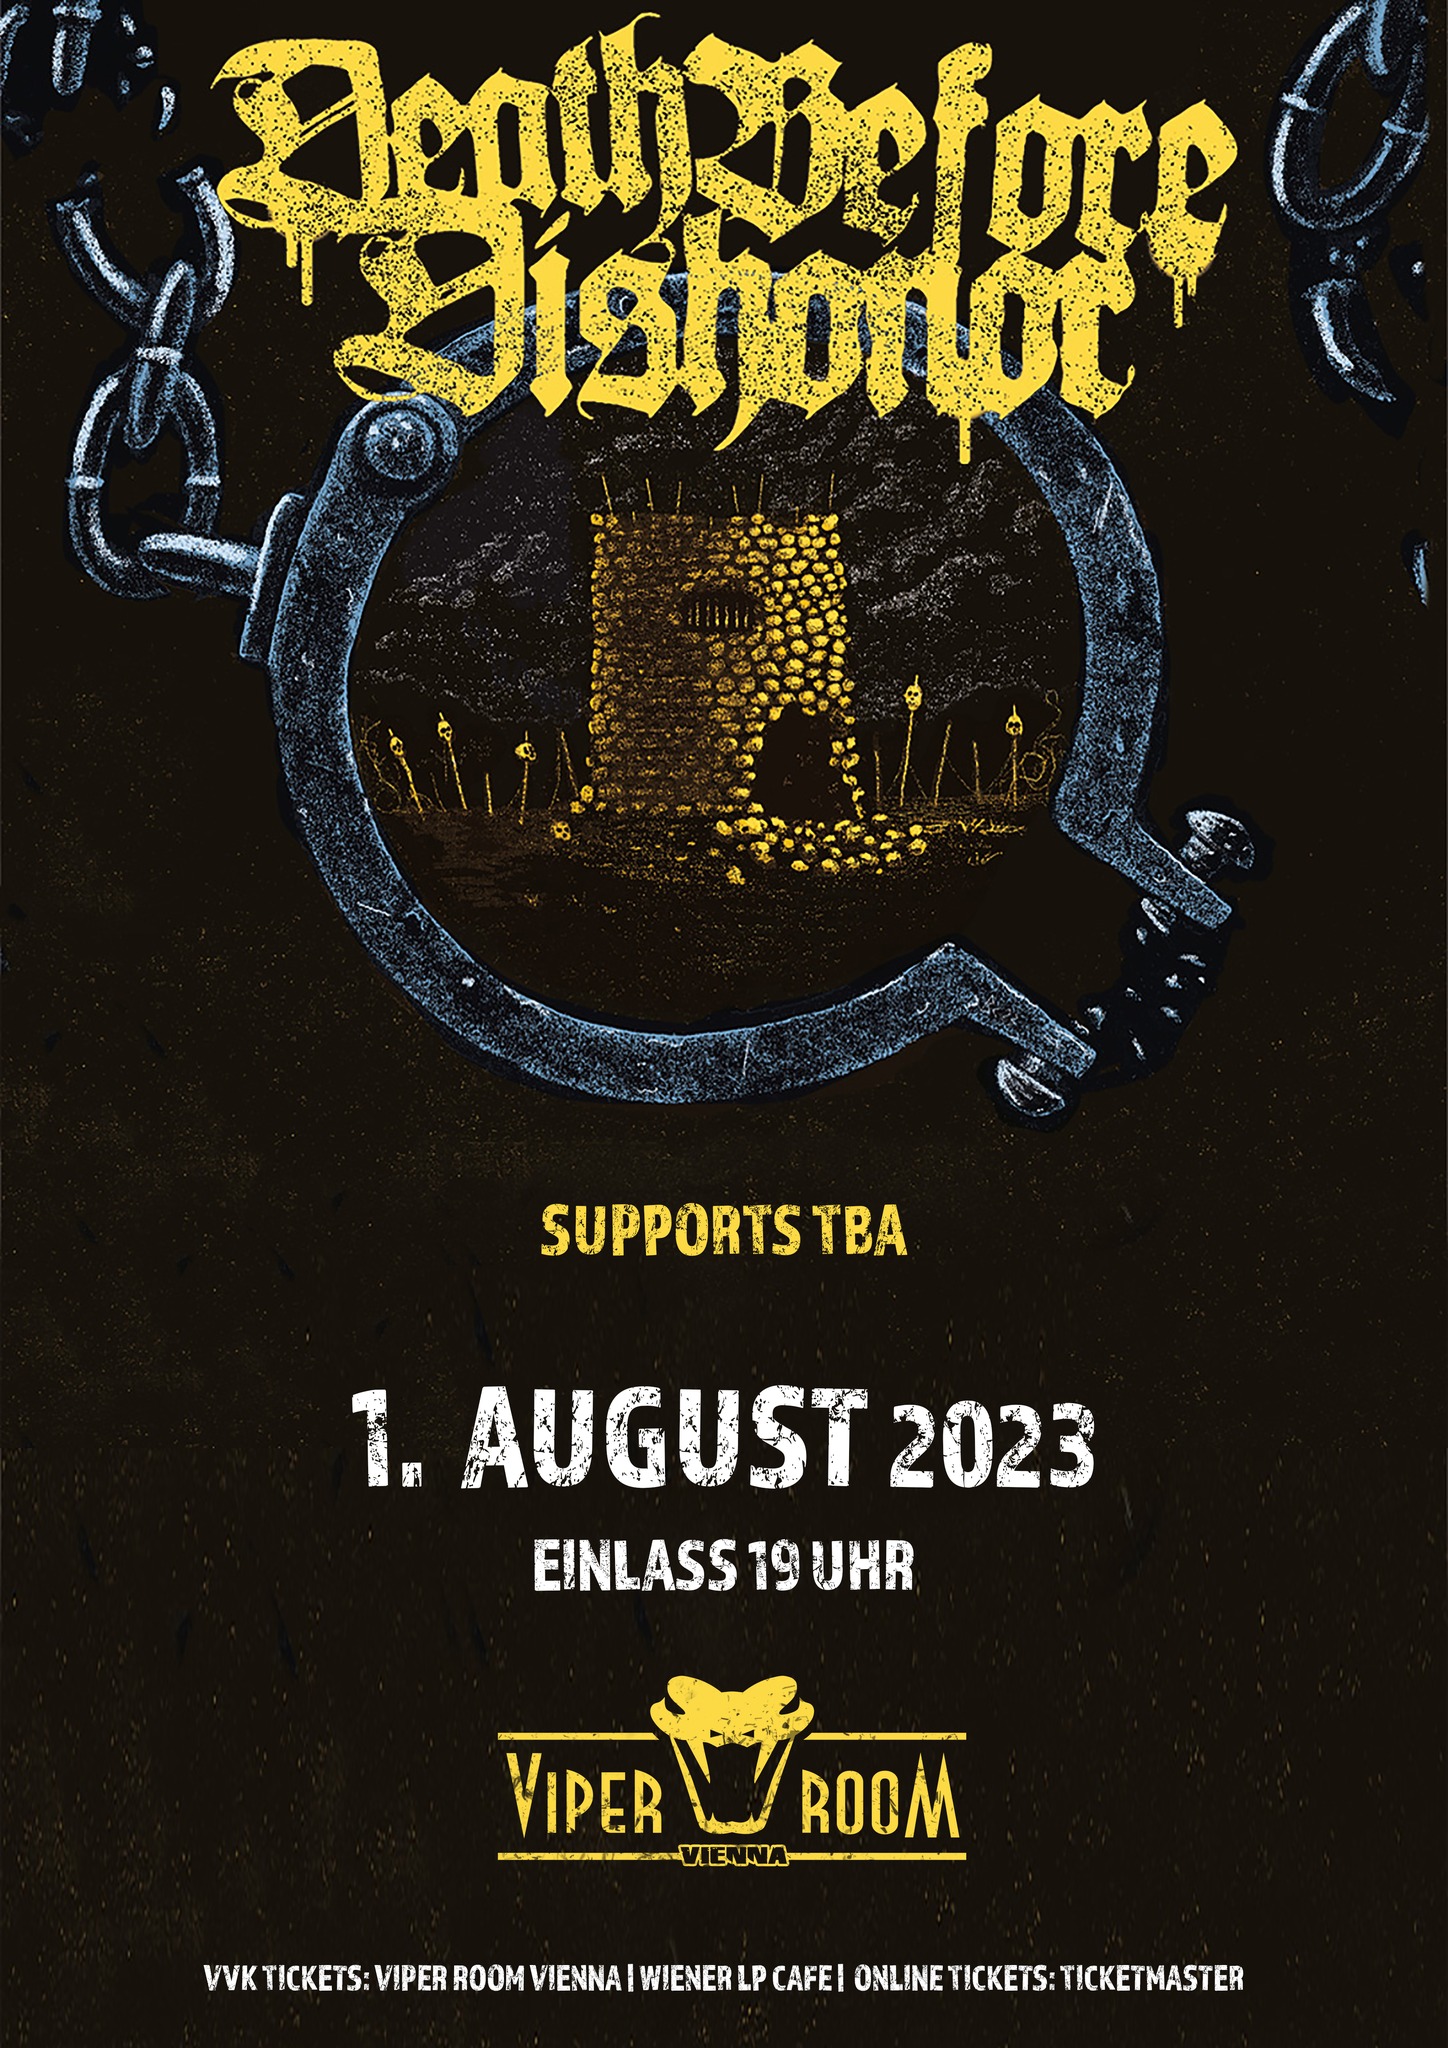 DEATH BEFORE DISHONOR & Supports am 1. August 2023 @ Viper Room.